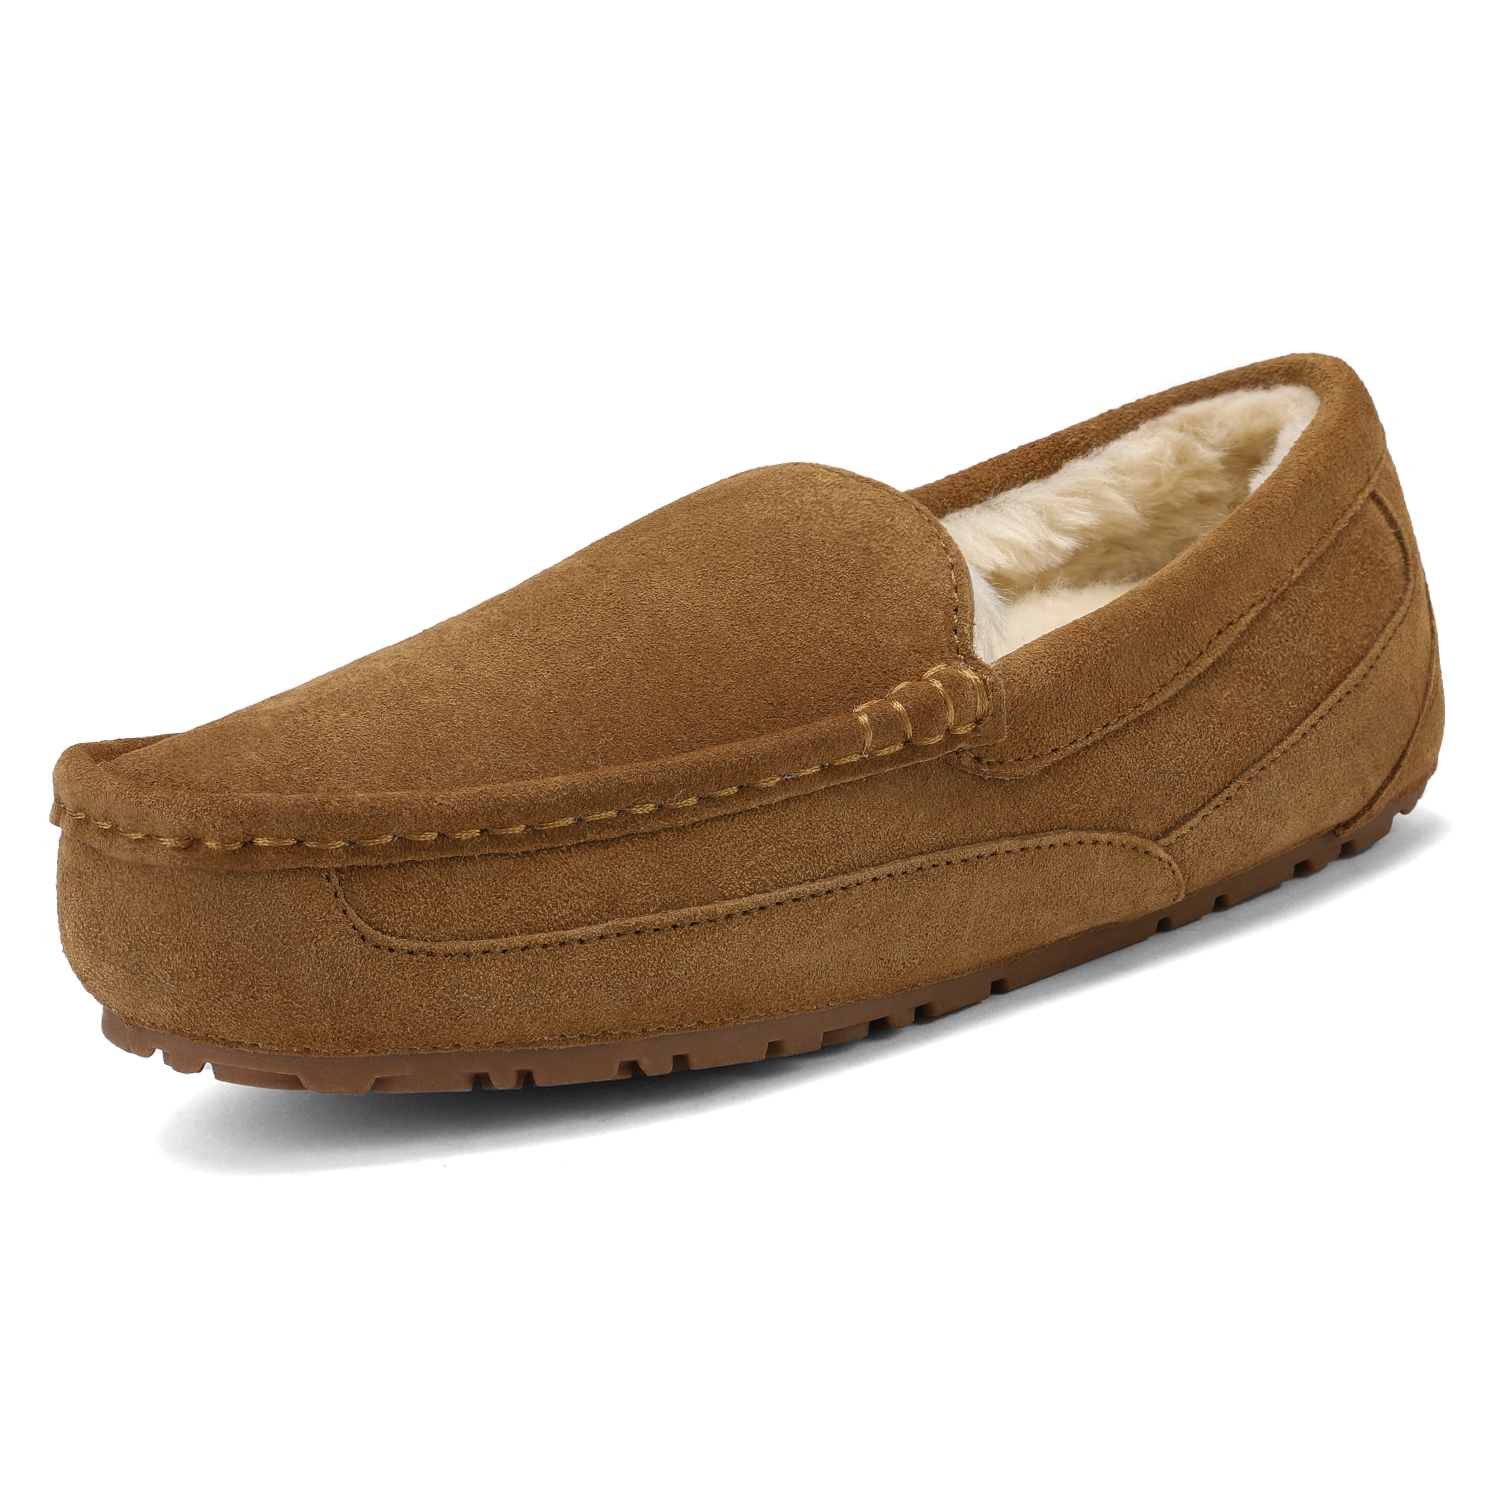 DREAM PAIRS Men/'s Suede Faux Fur Lined Moccasin Slippers